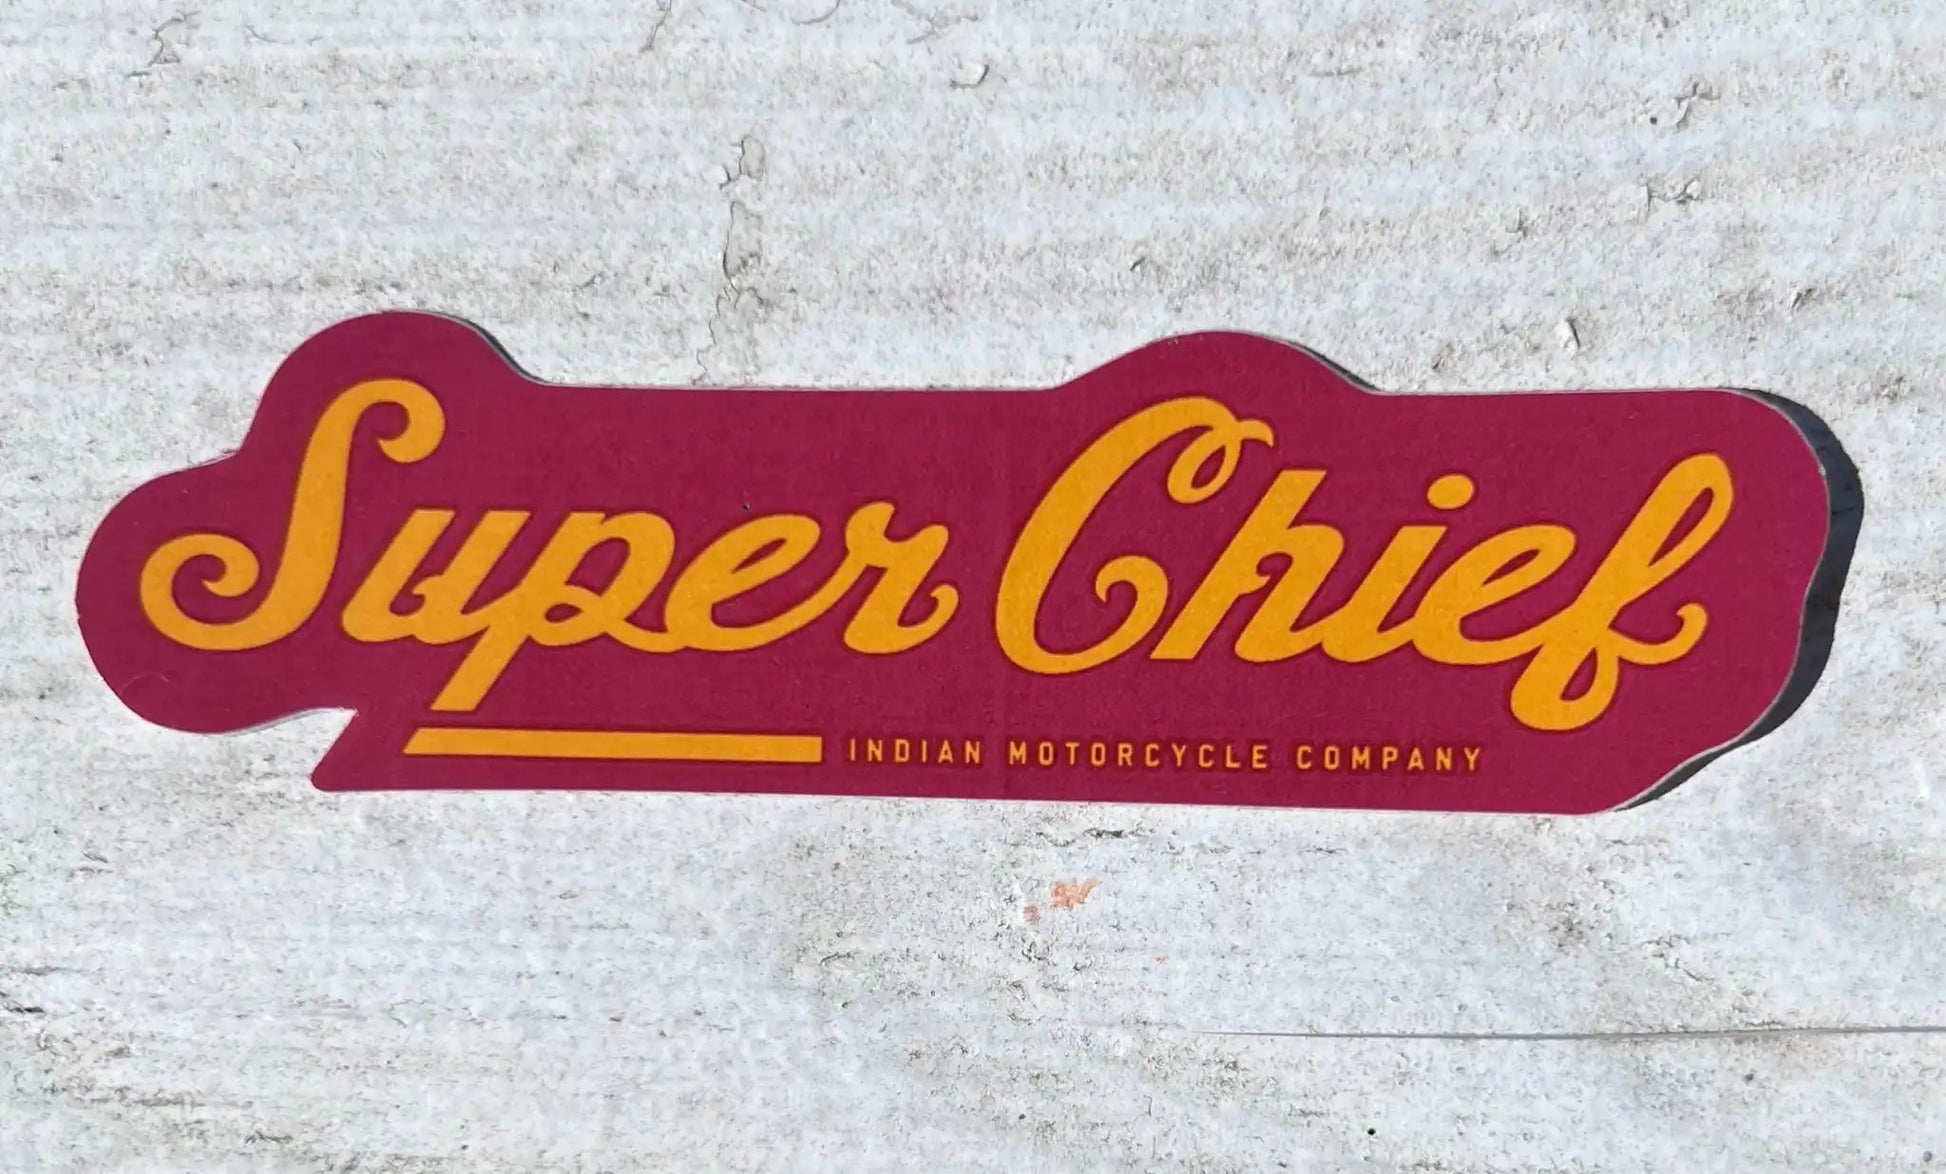 Indian Motorcycle Company Super Chief Script Decal Traditional Color NOS Relic has been stored safely away and measures approximately 2.5 x 3.25 inch shield 